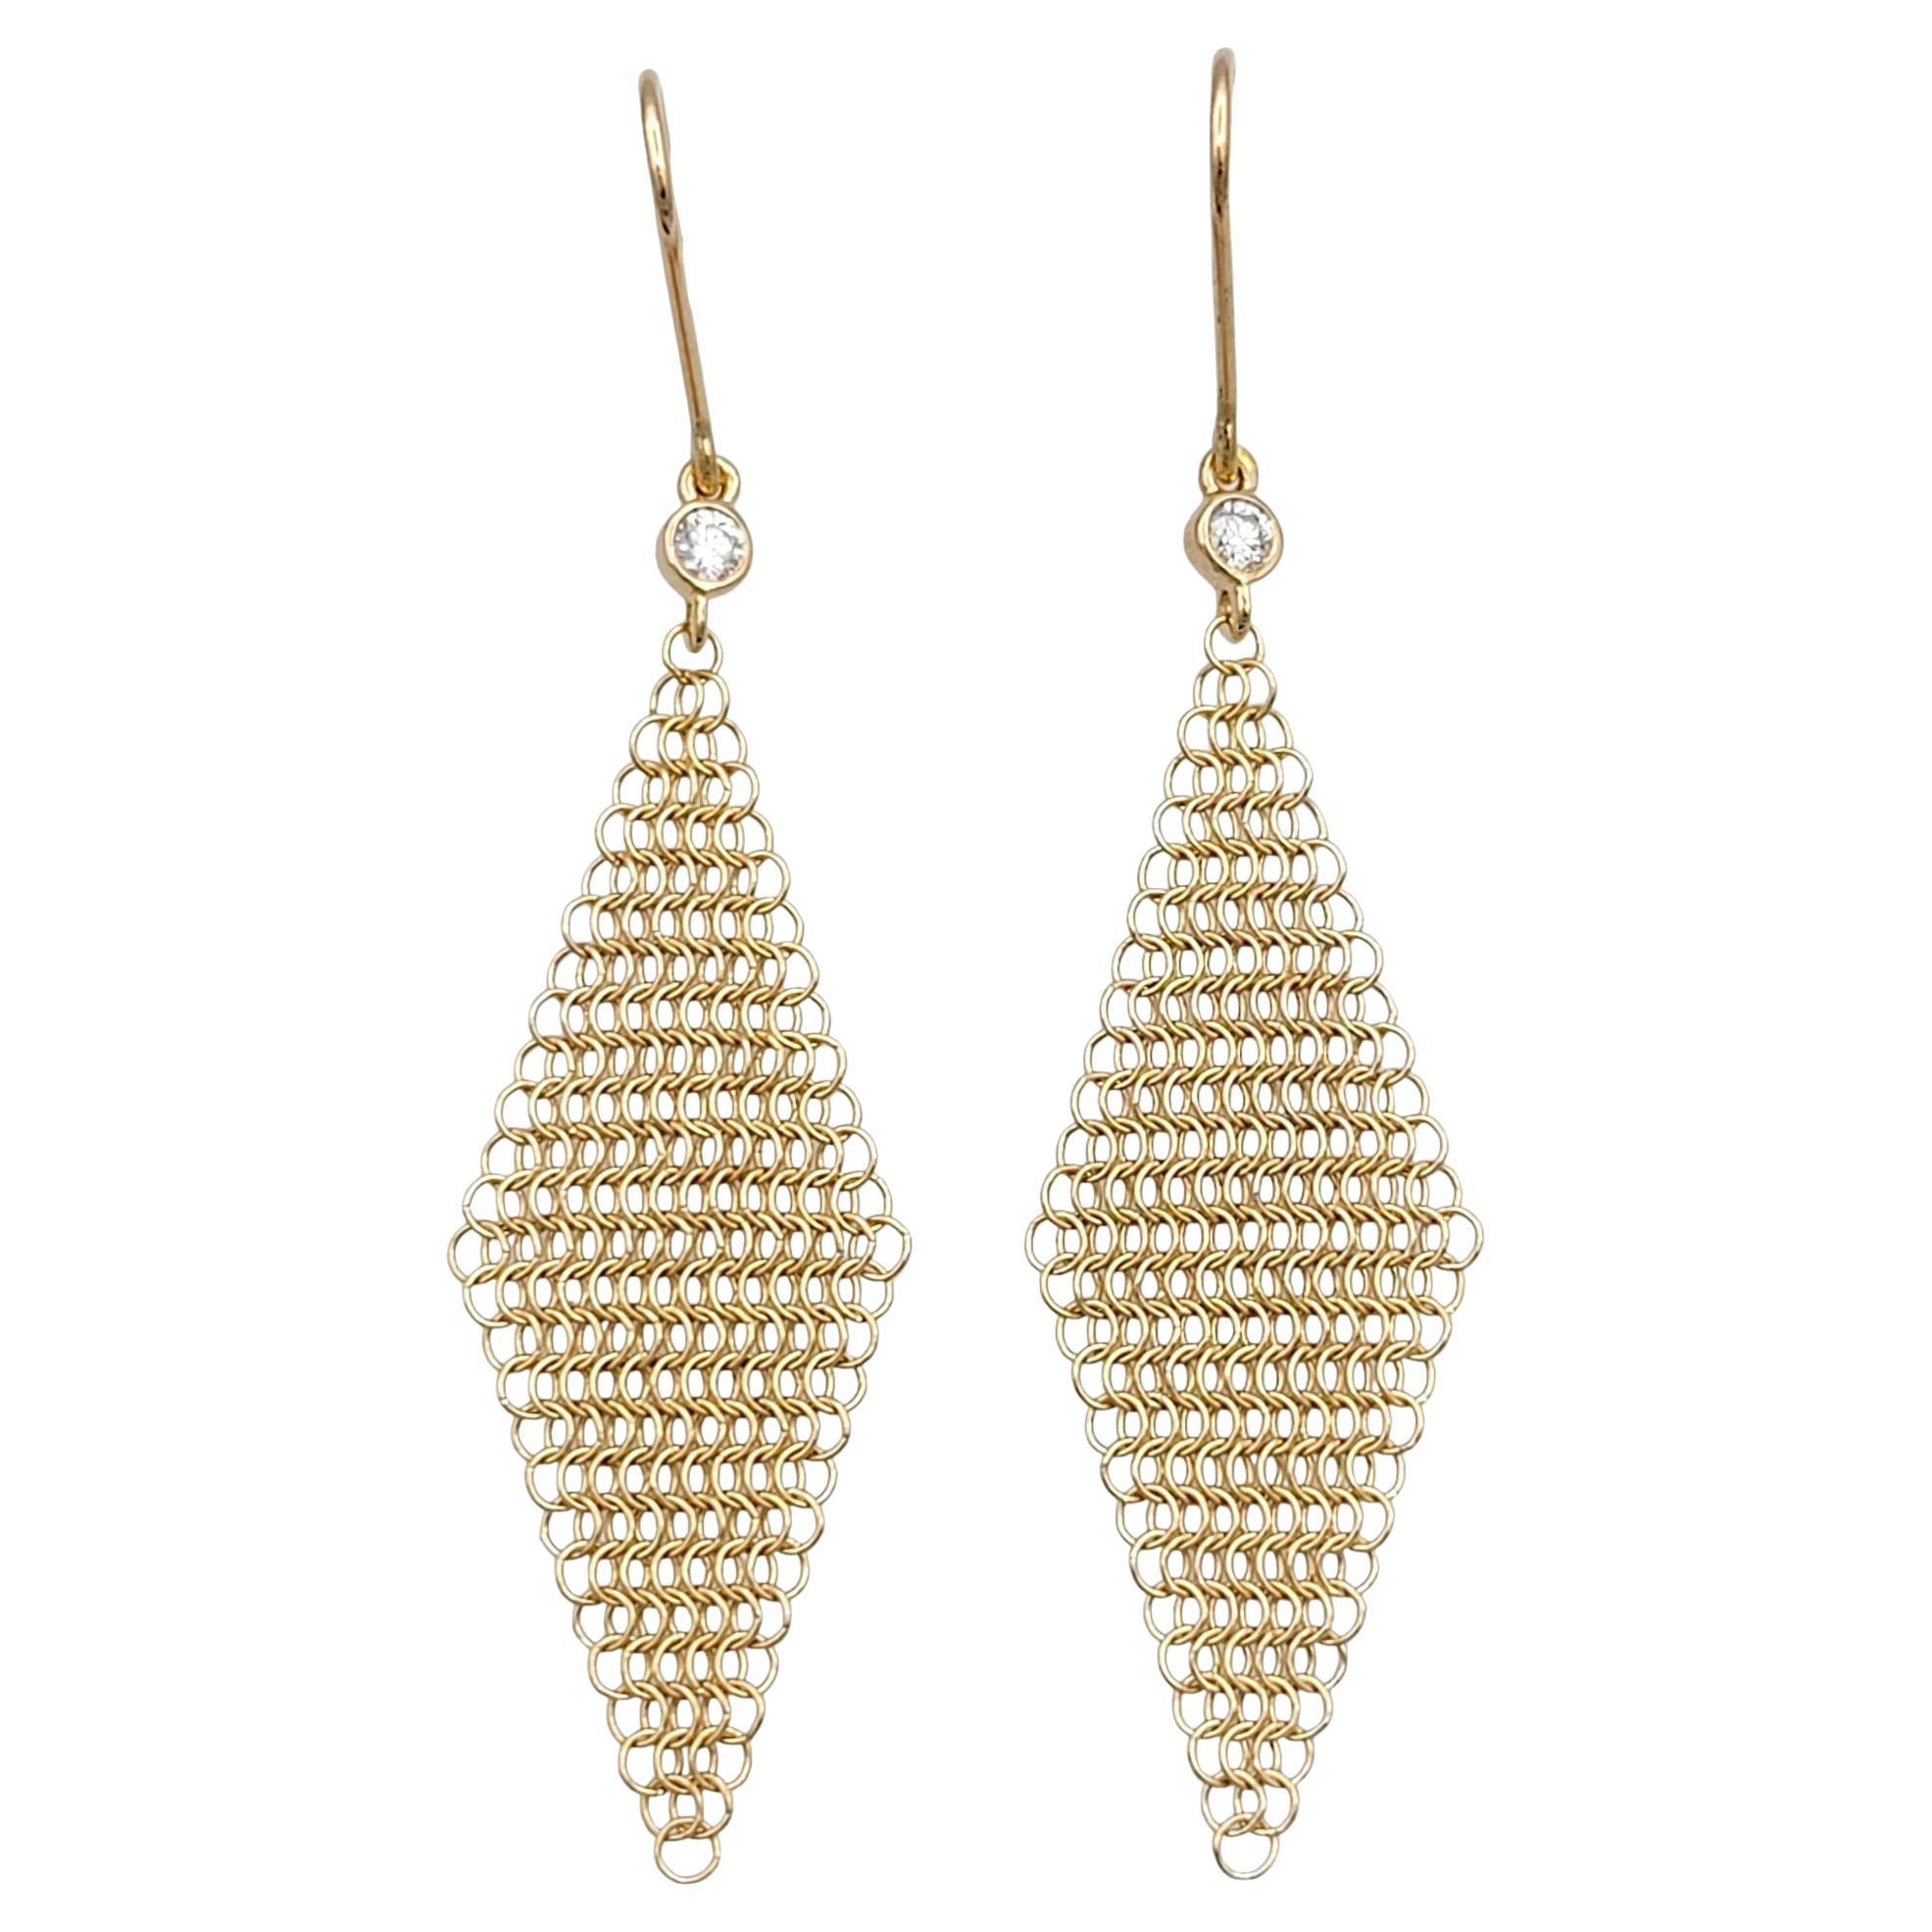 Elsa Peretti's exquisite design for Tiffany & Co. has manifested itself in a captivating pair of rose gold earrings that seamlessly blend sophistication and modernity. The delicate mesh diamond shape of the earrings exudes a sense of intricate